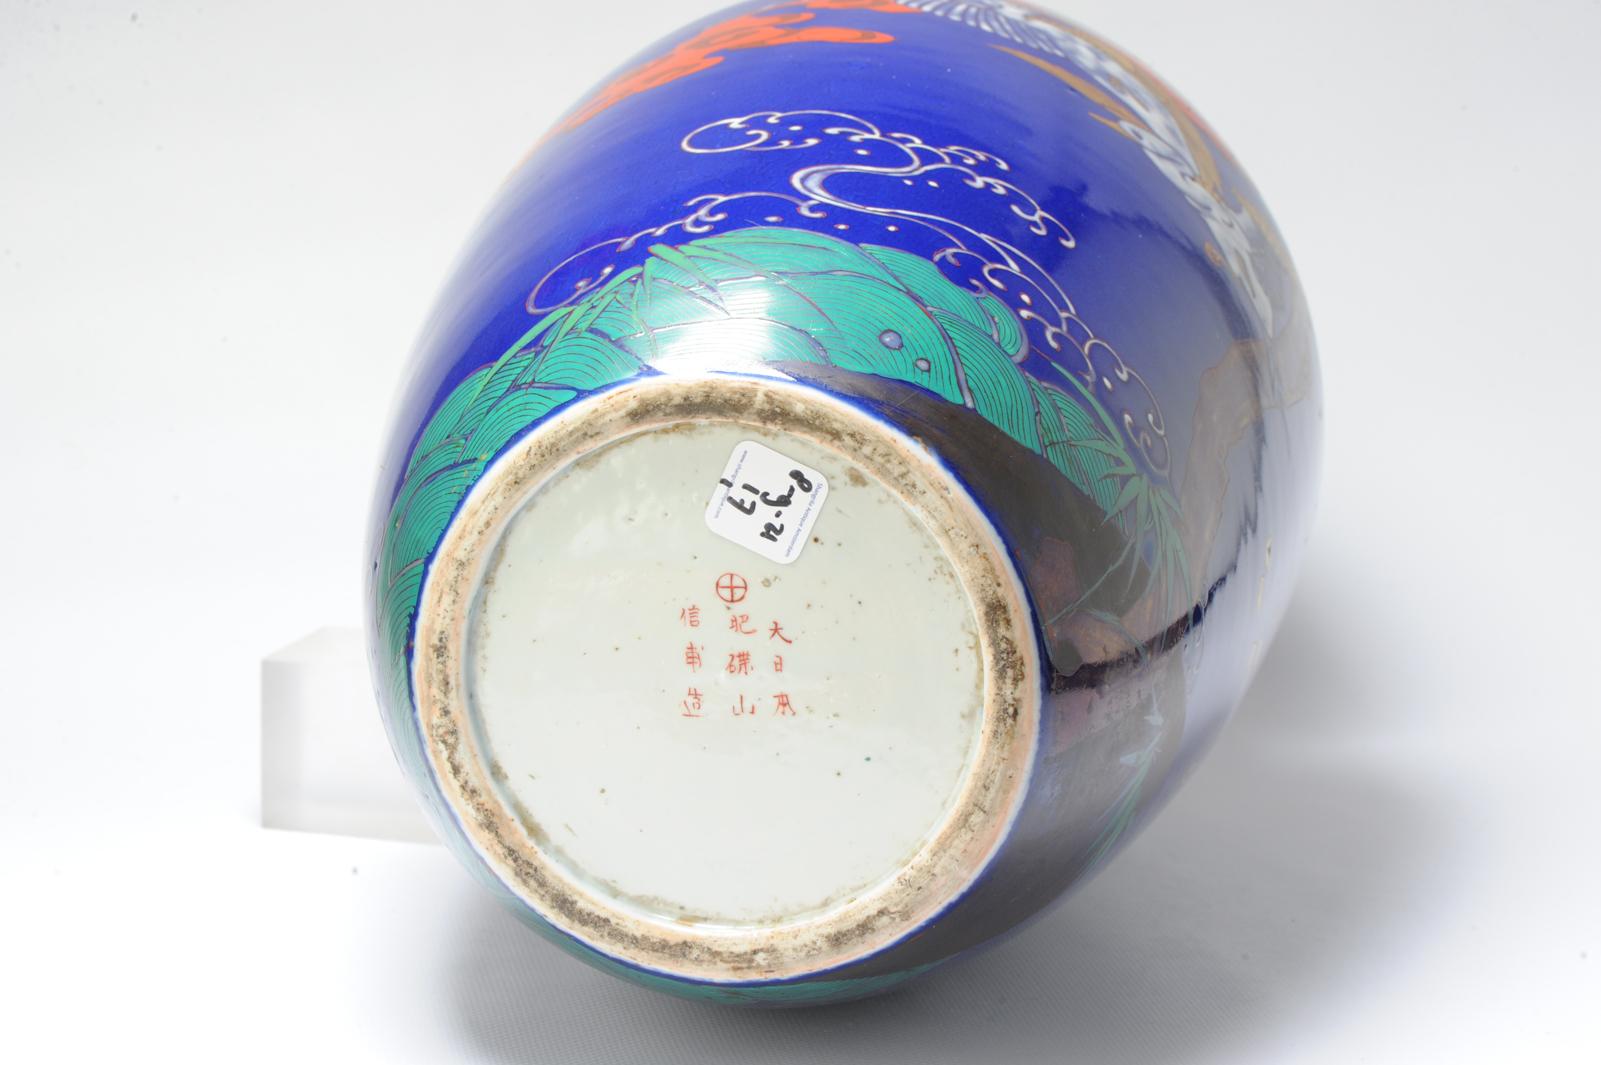 Rare Japanese Porcelain Antique Vase Marked Hichozan, 19th Century In Good Condition For Sale In Amsterdam, Noord Holland